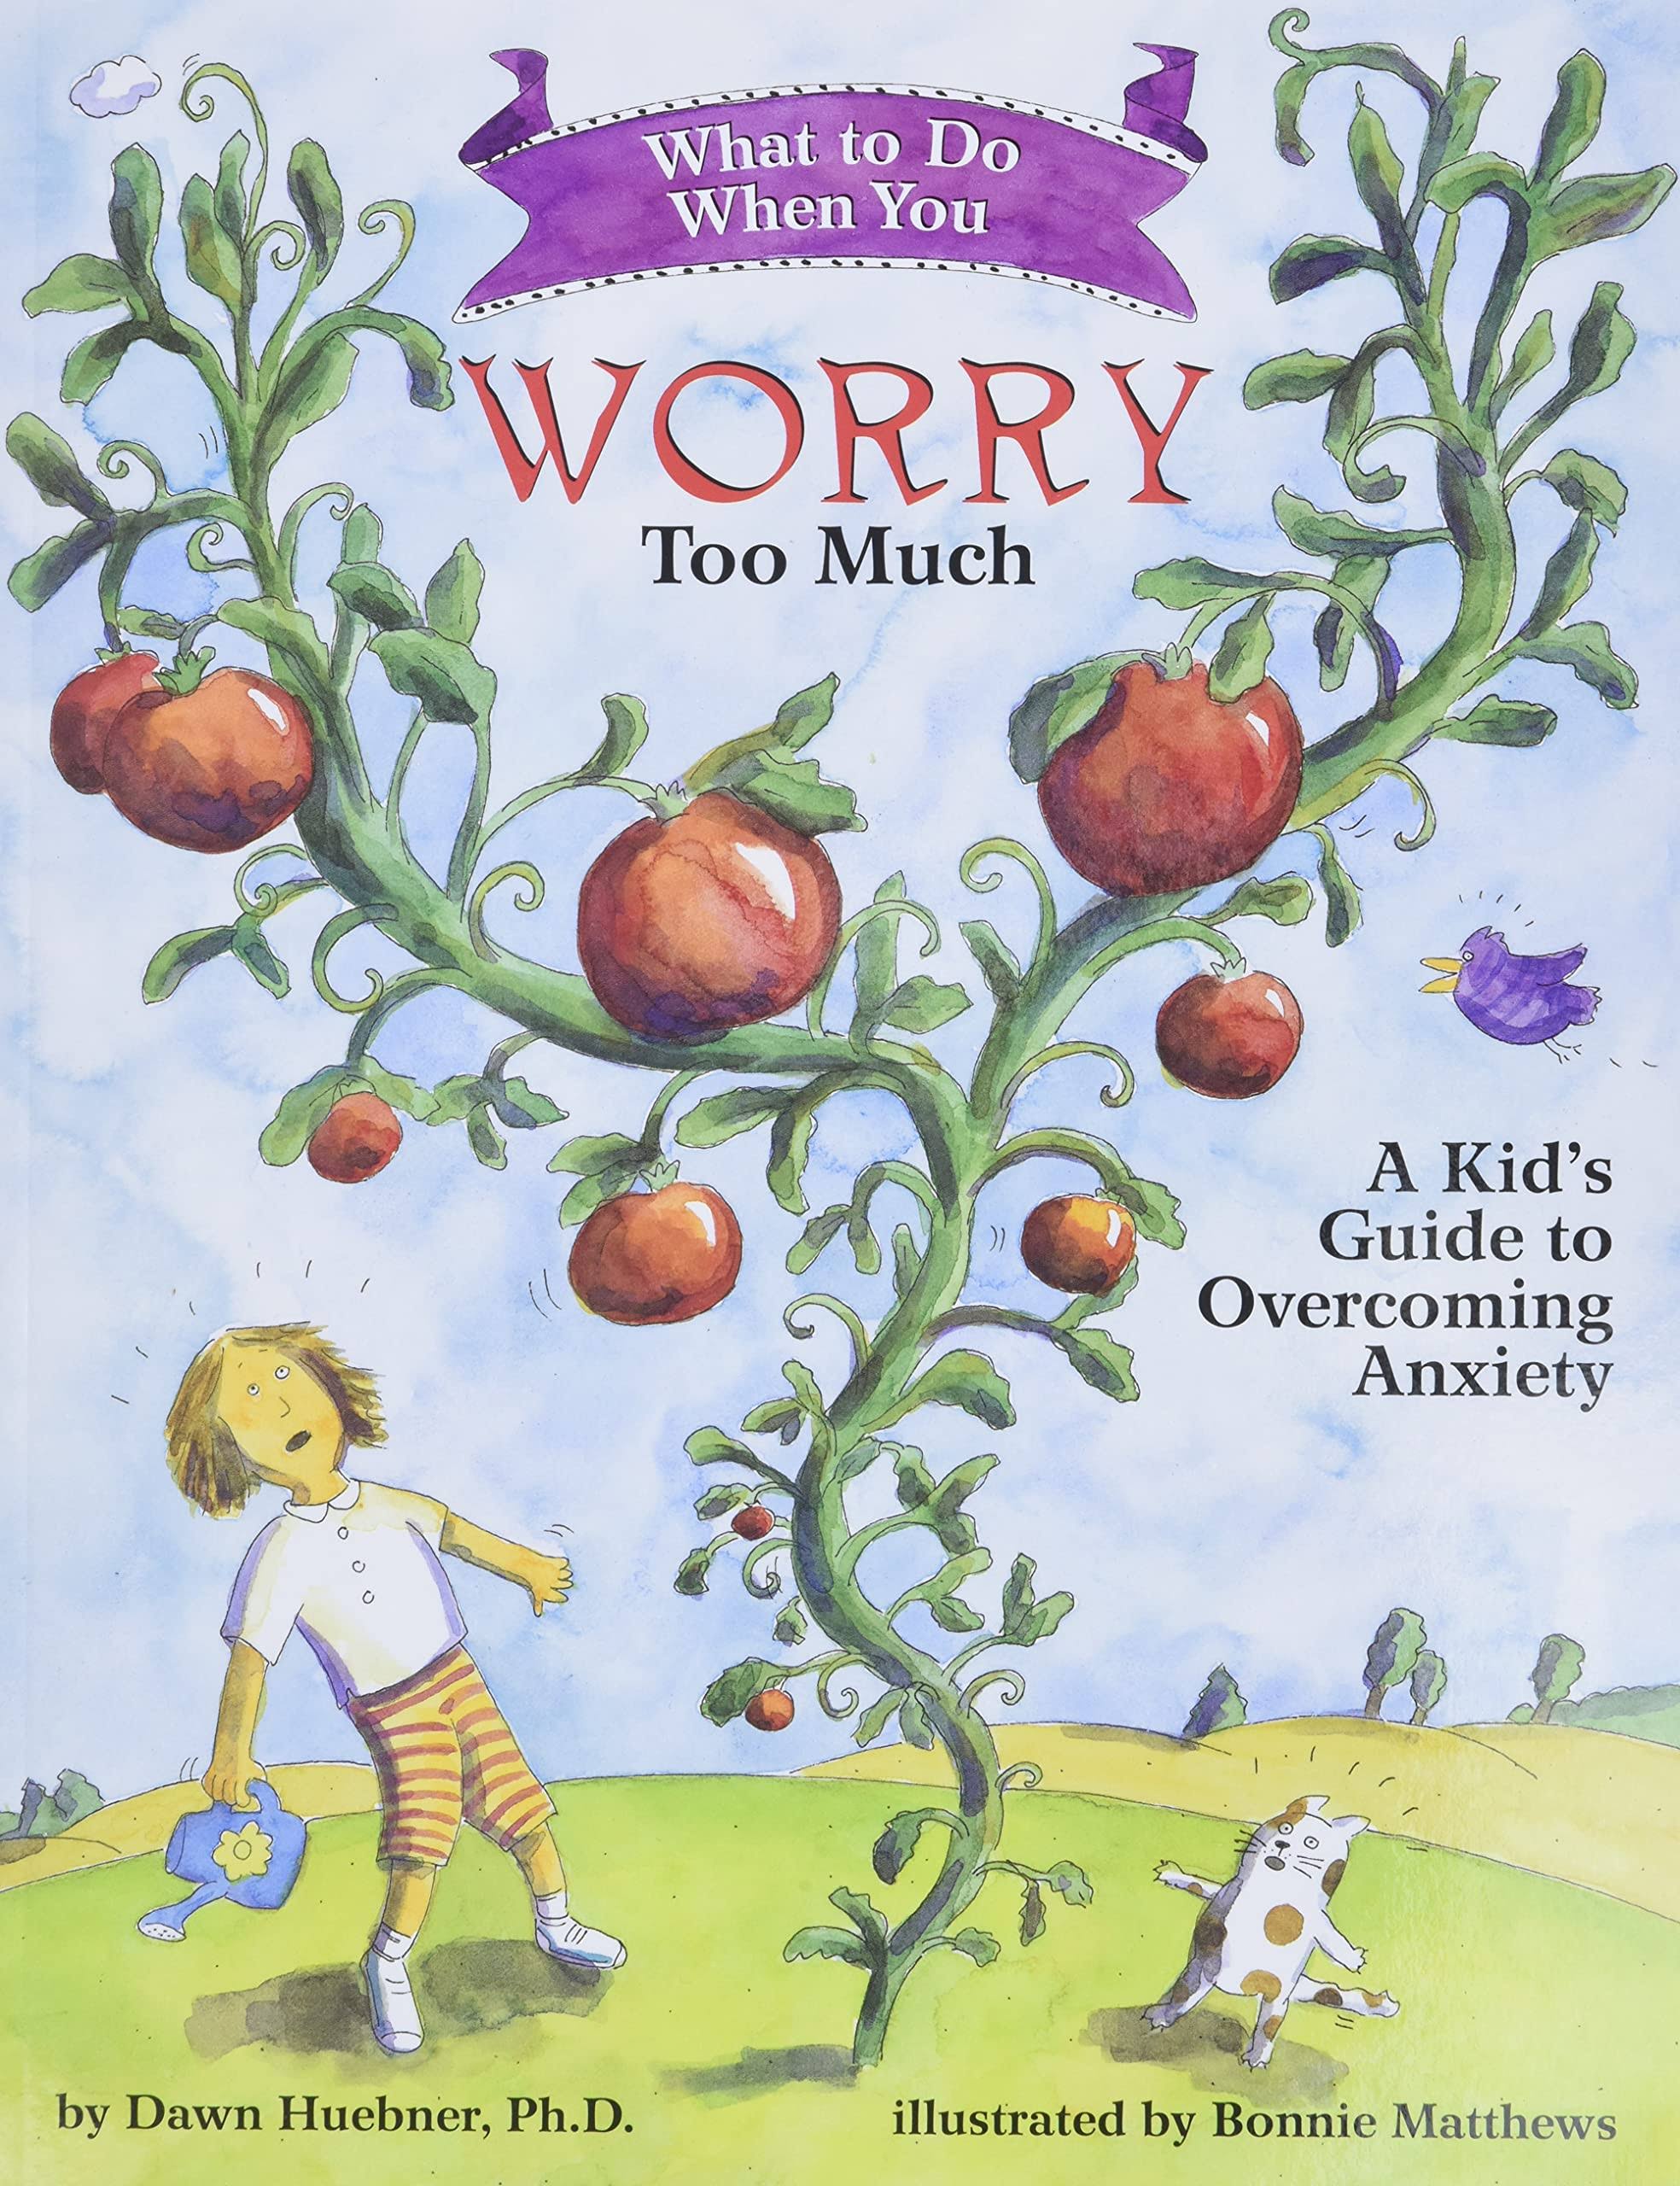 What to Do When You Worry Too Much - Dawn Huebner